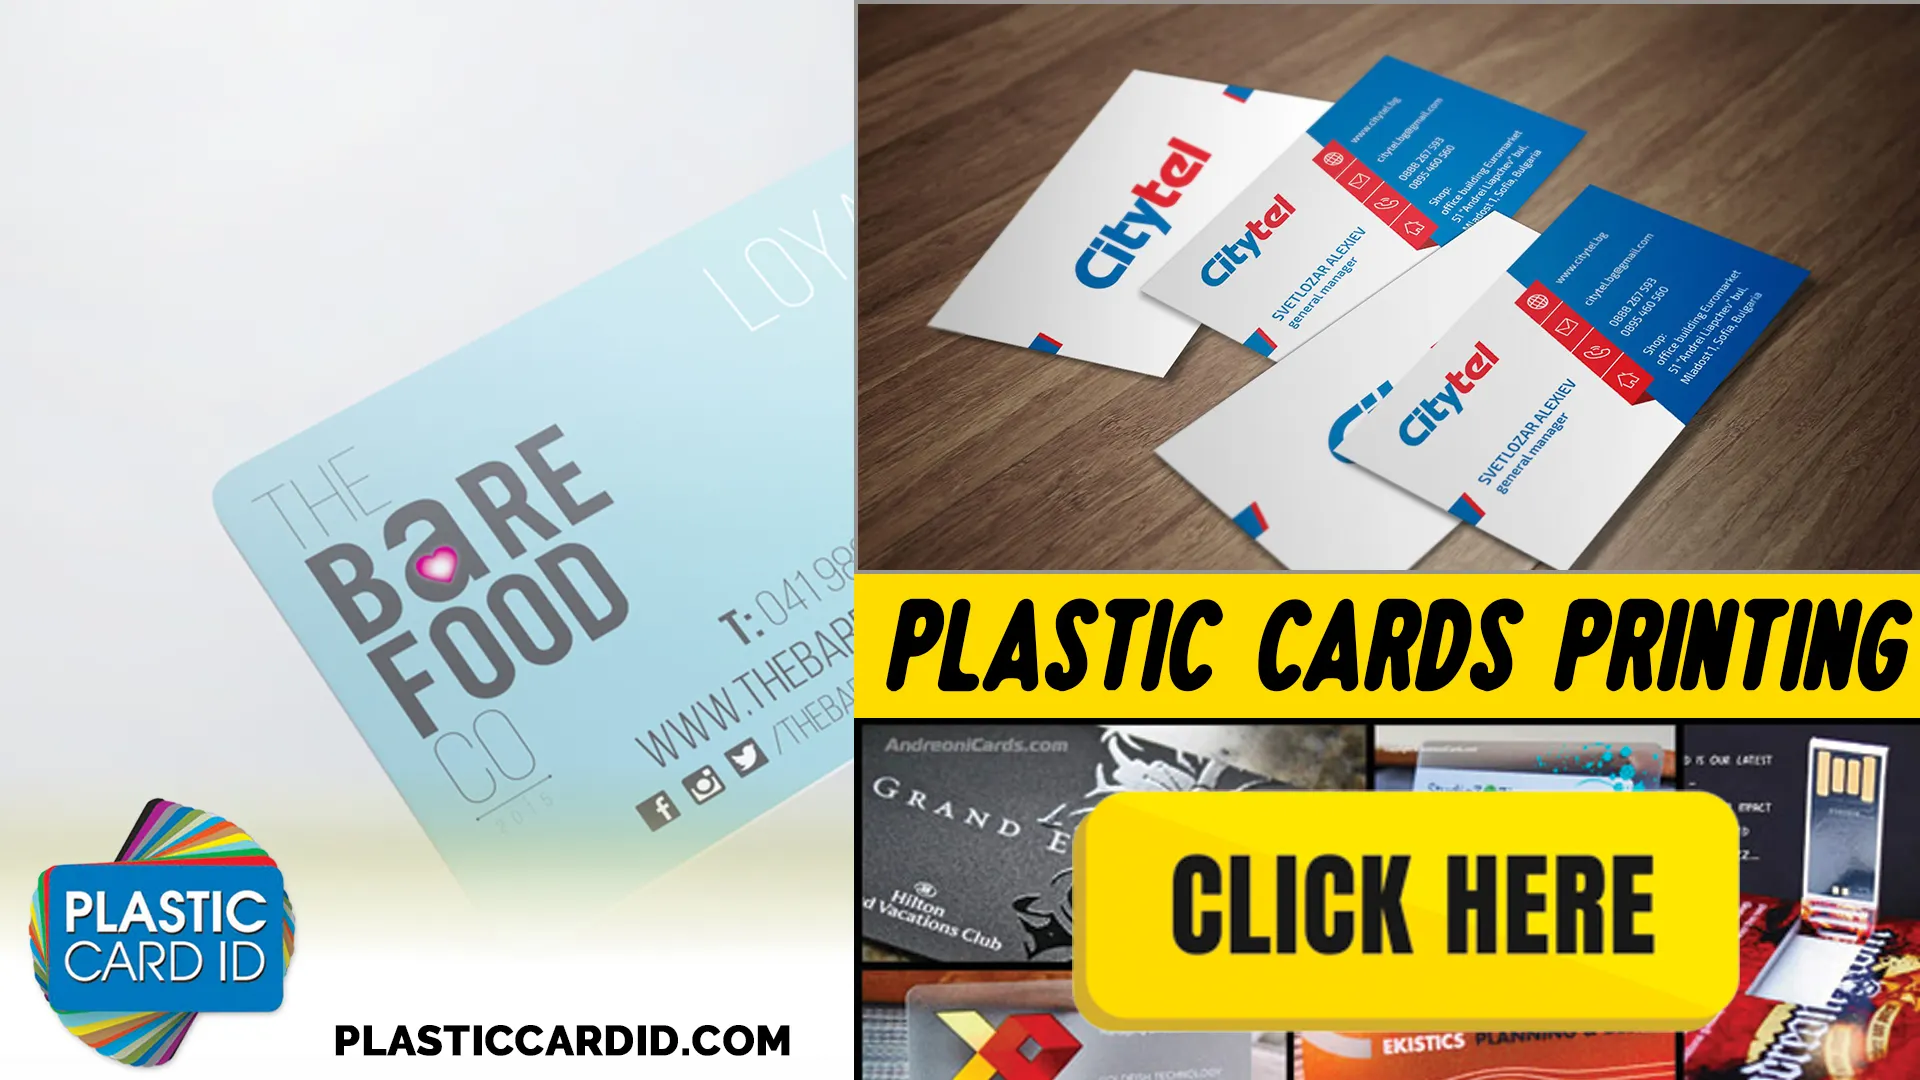 Weatherproof Your Brand with Durable Plastic Cards